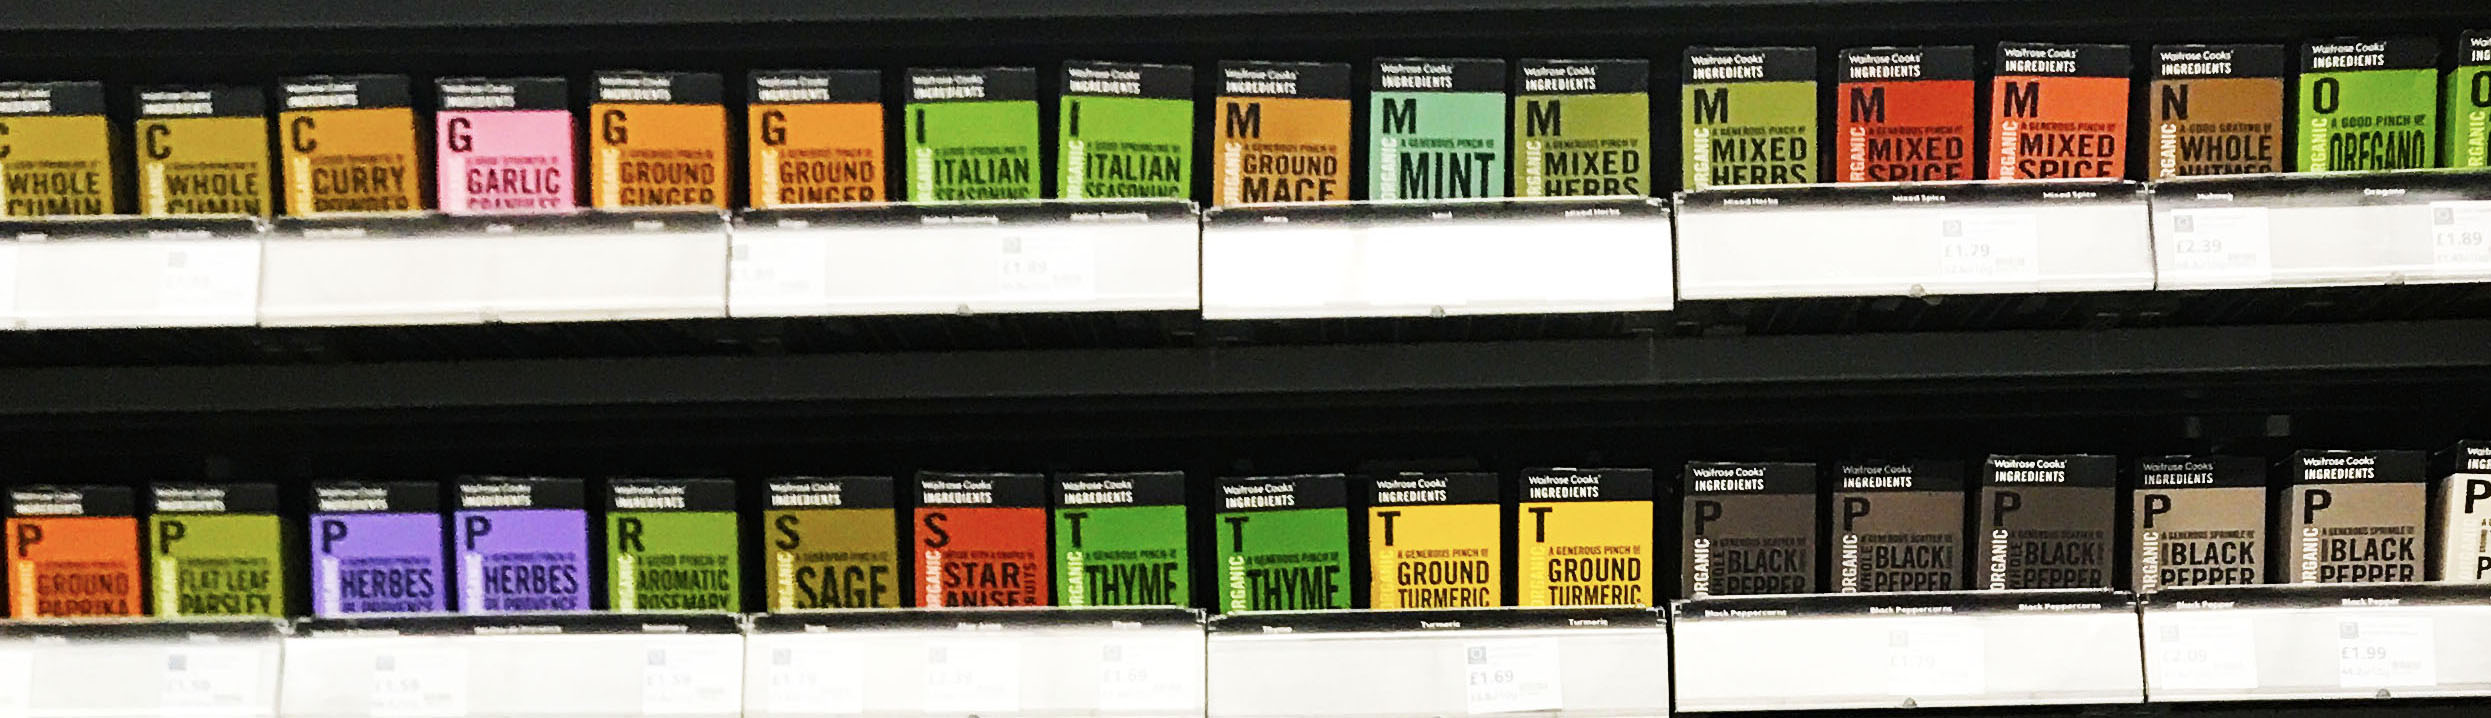 A rack of spices in a supermarket